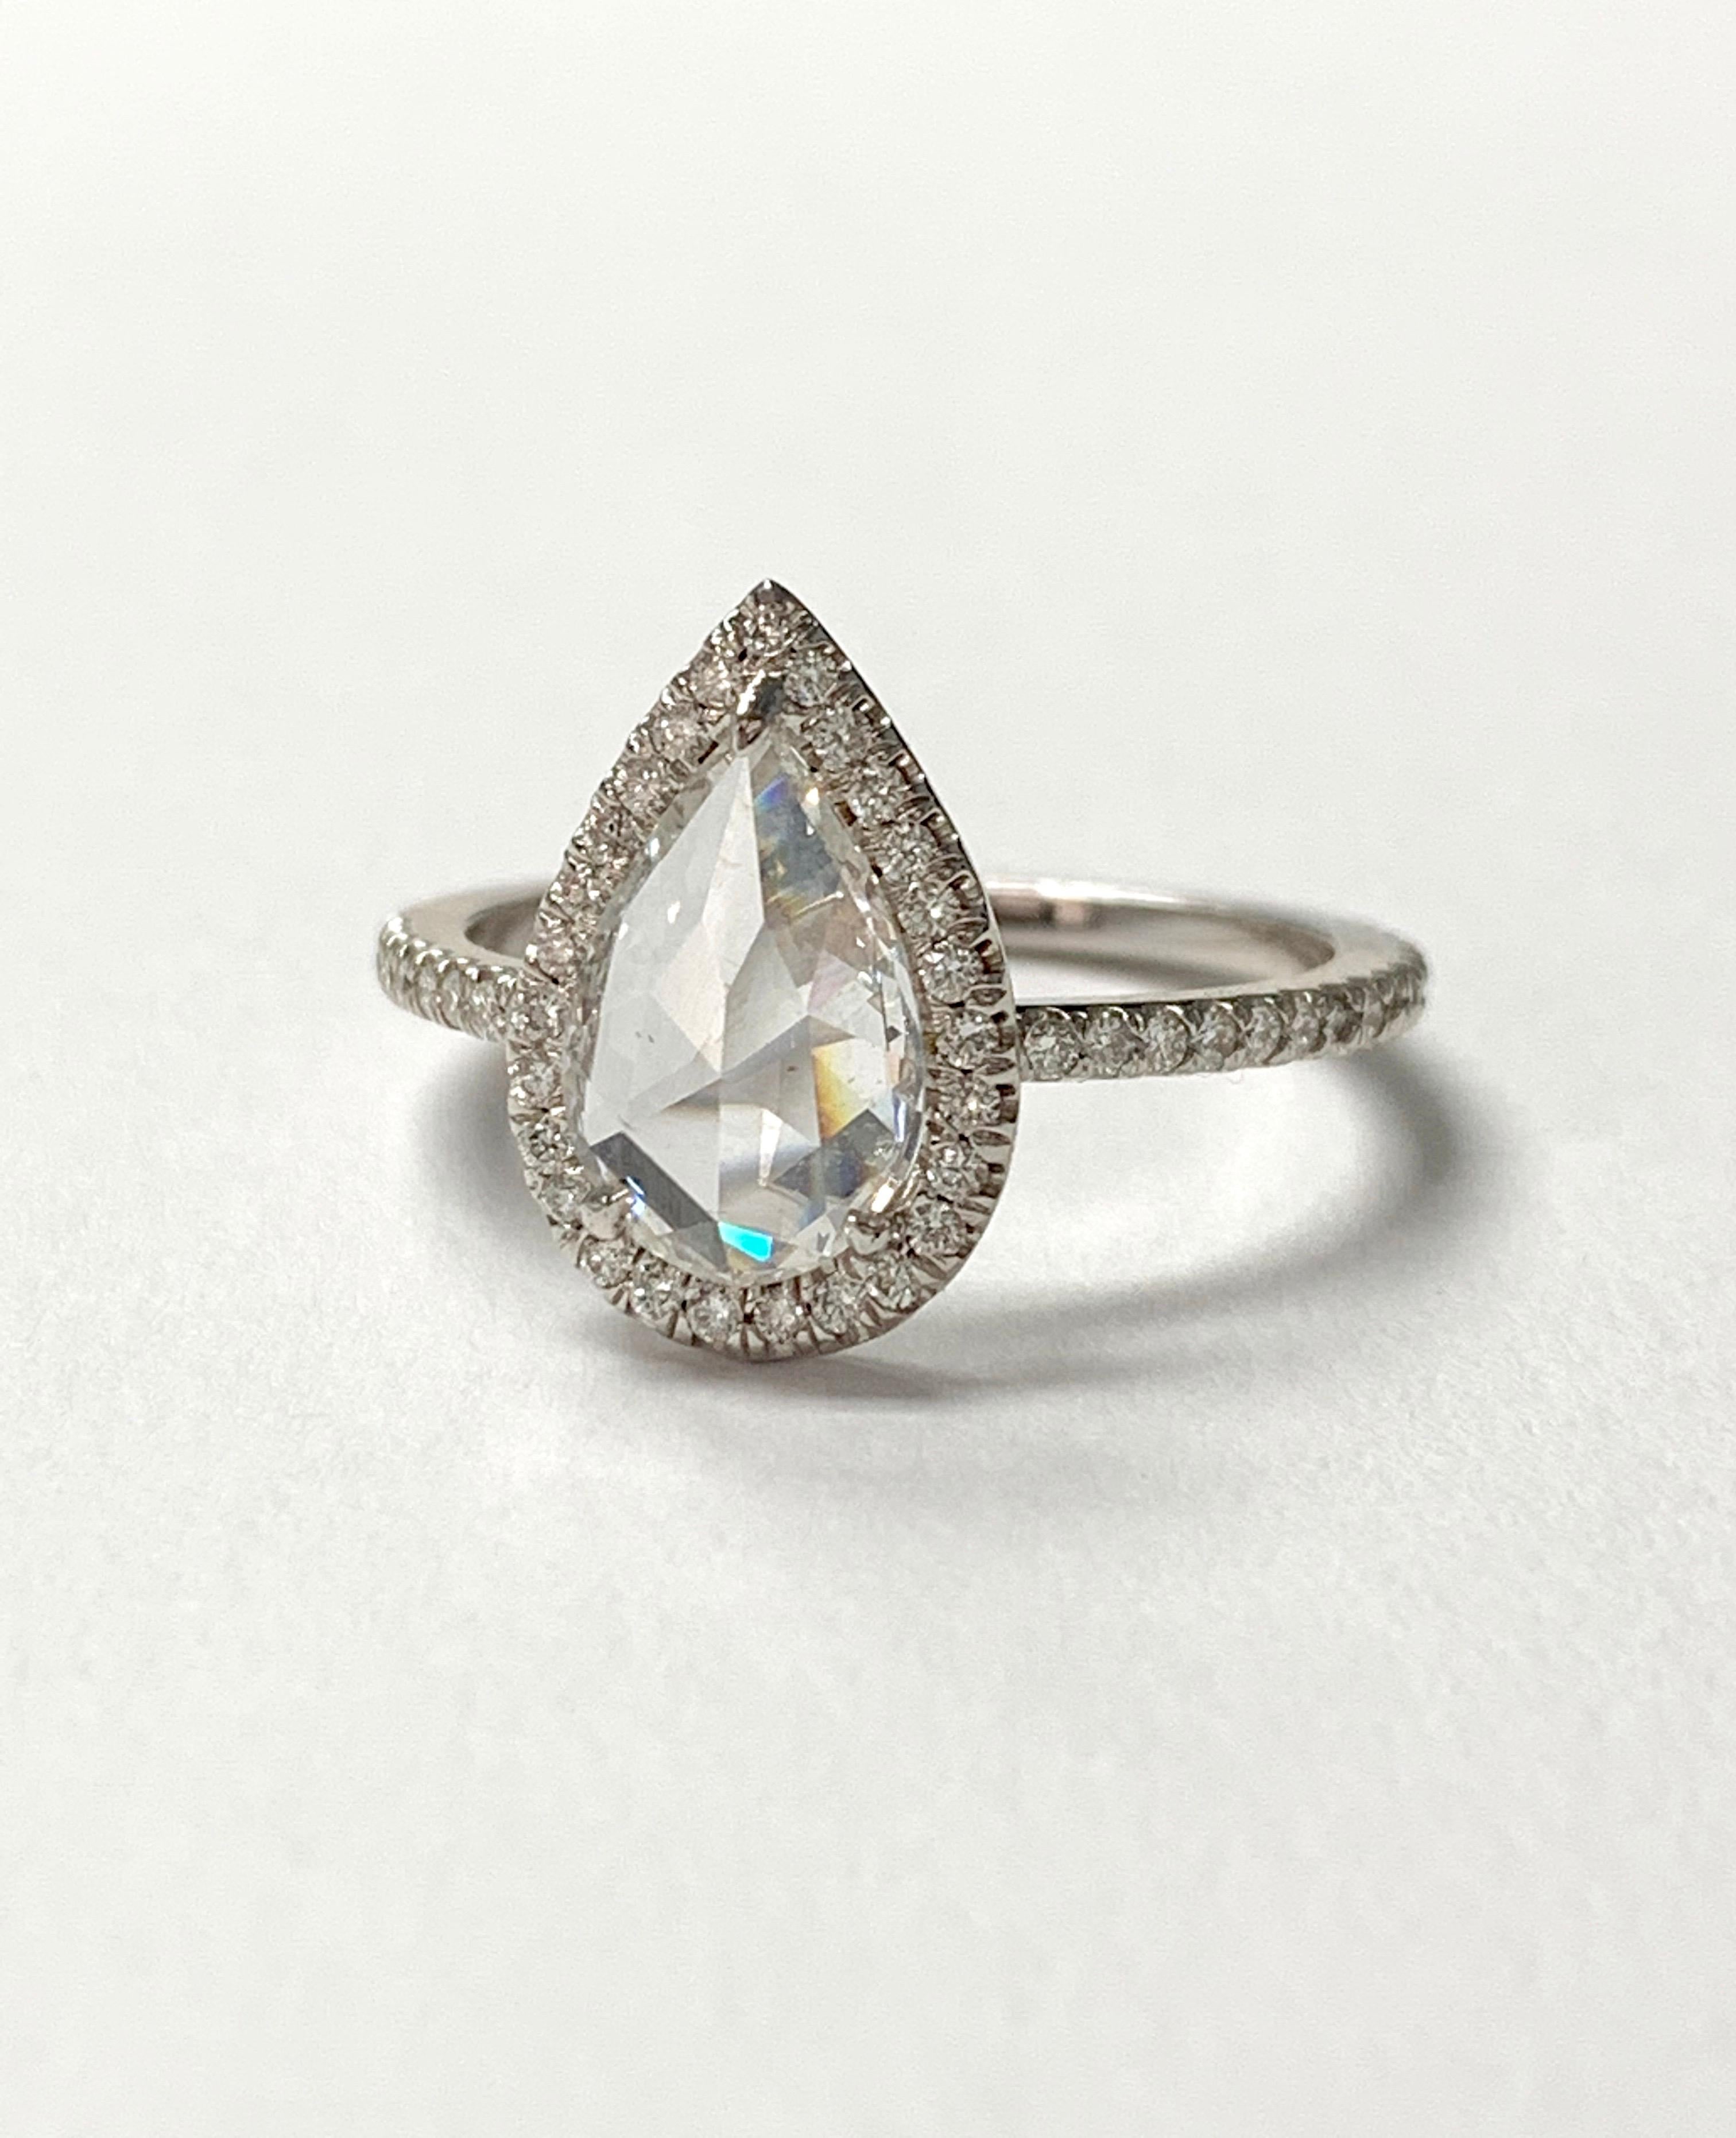 This gorgeous white pear shape rose cut diamond engagement ring is beautifully handmade in 18k white gold. 
The details are as follows : 
Pear shape rose cut diamond weight : 1.03 carat ( F color and SI1 clarity ) 
Diamond weight : 0.30 carat 
Metal